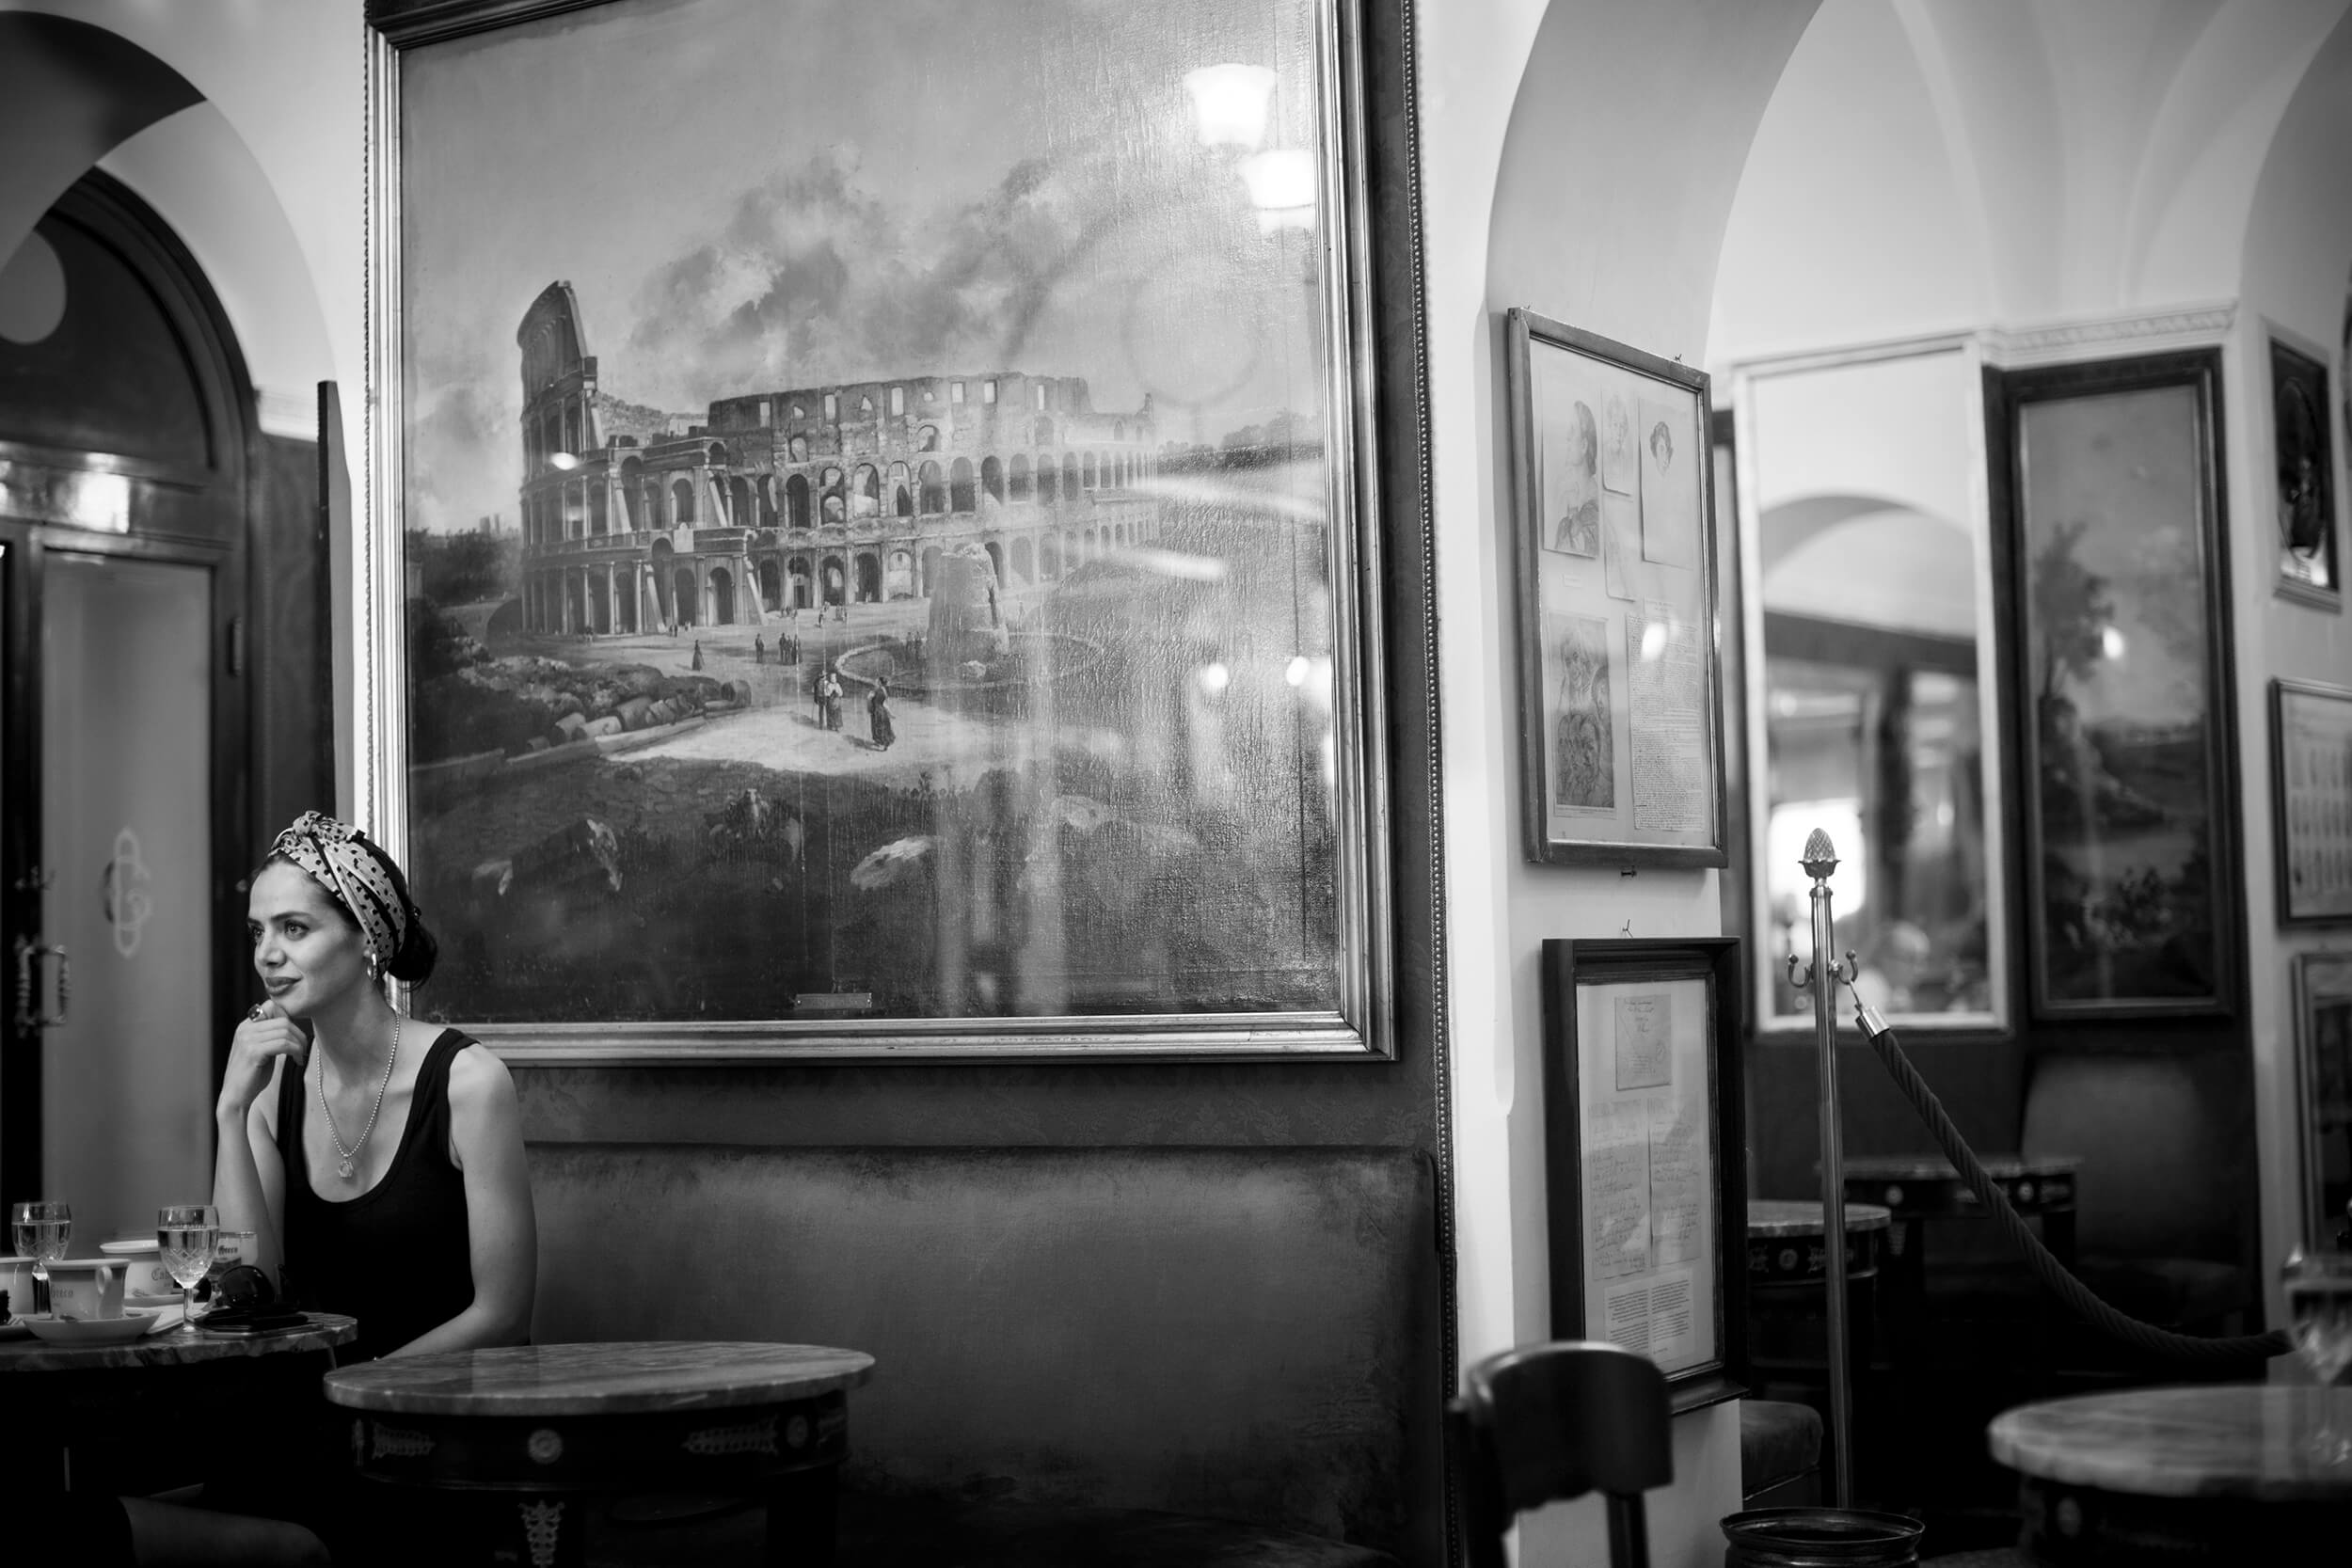  Caffè Greco, Italy, opened 250 years ago and is the oldest coffee caffet in Rome. 